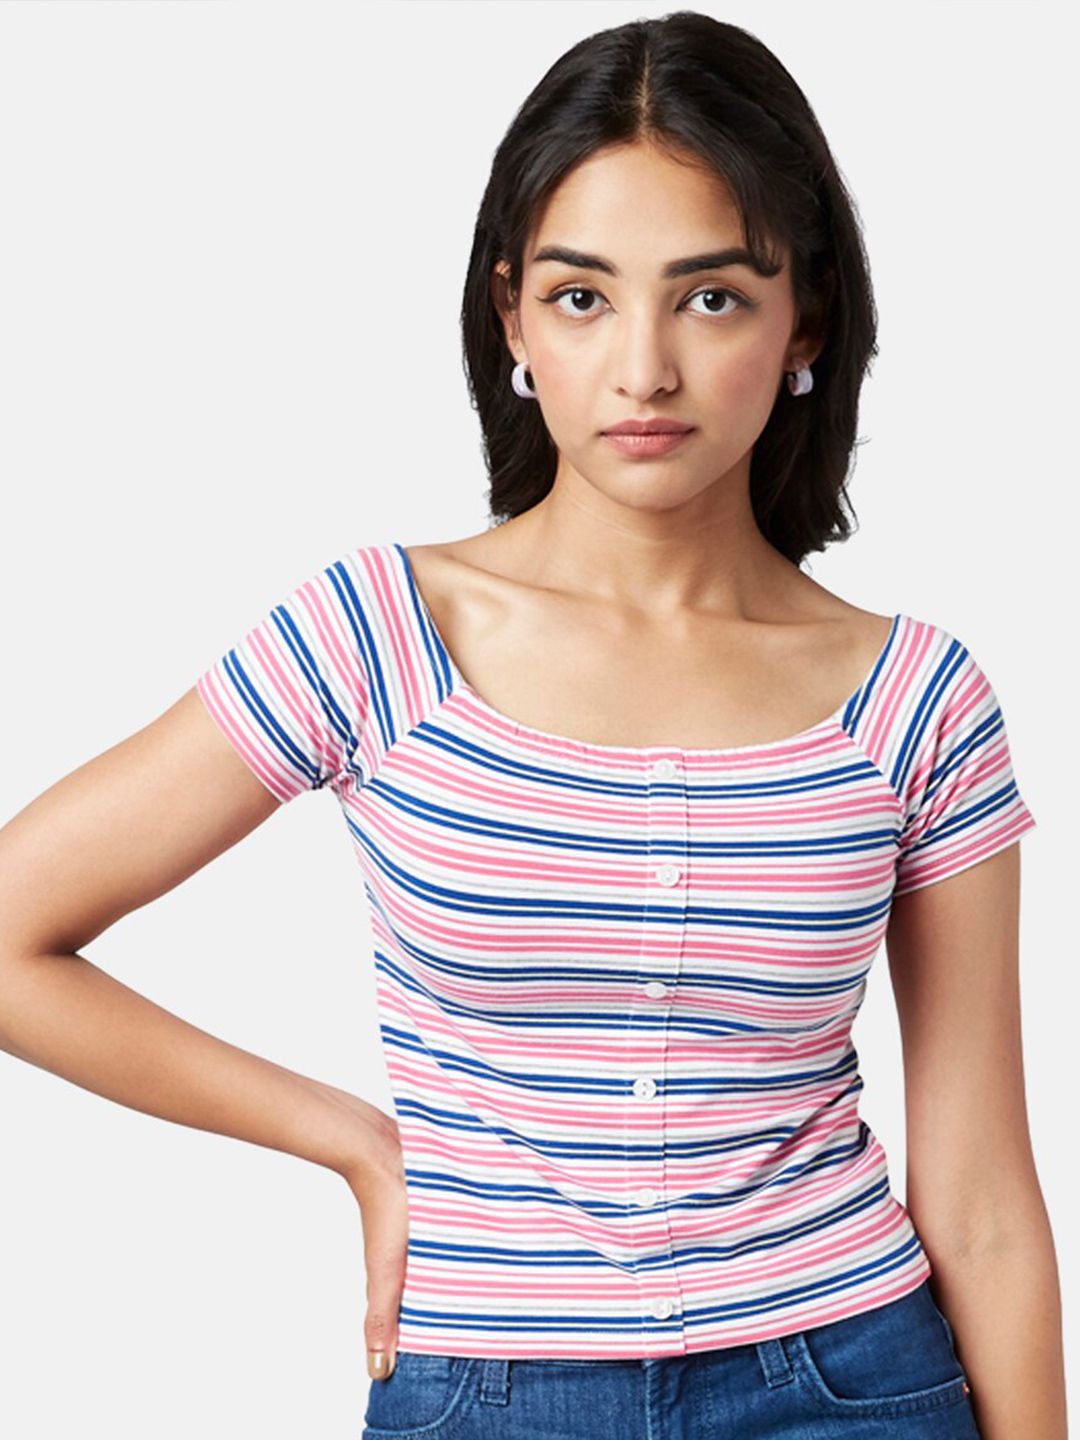 YU by Pantaloons Striped Square Neck Top Price in India